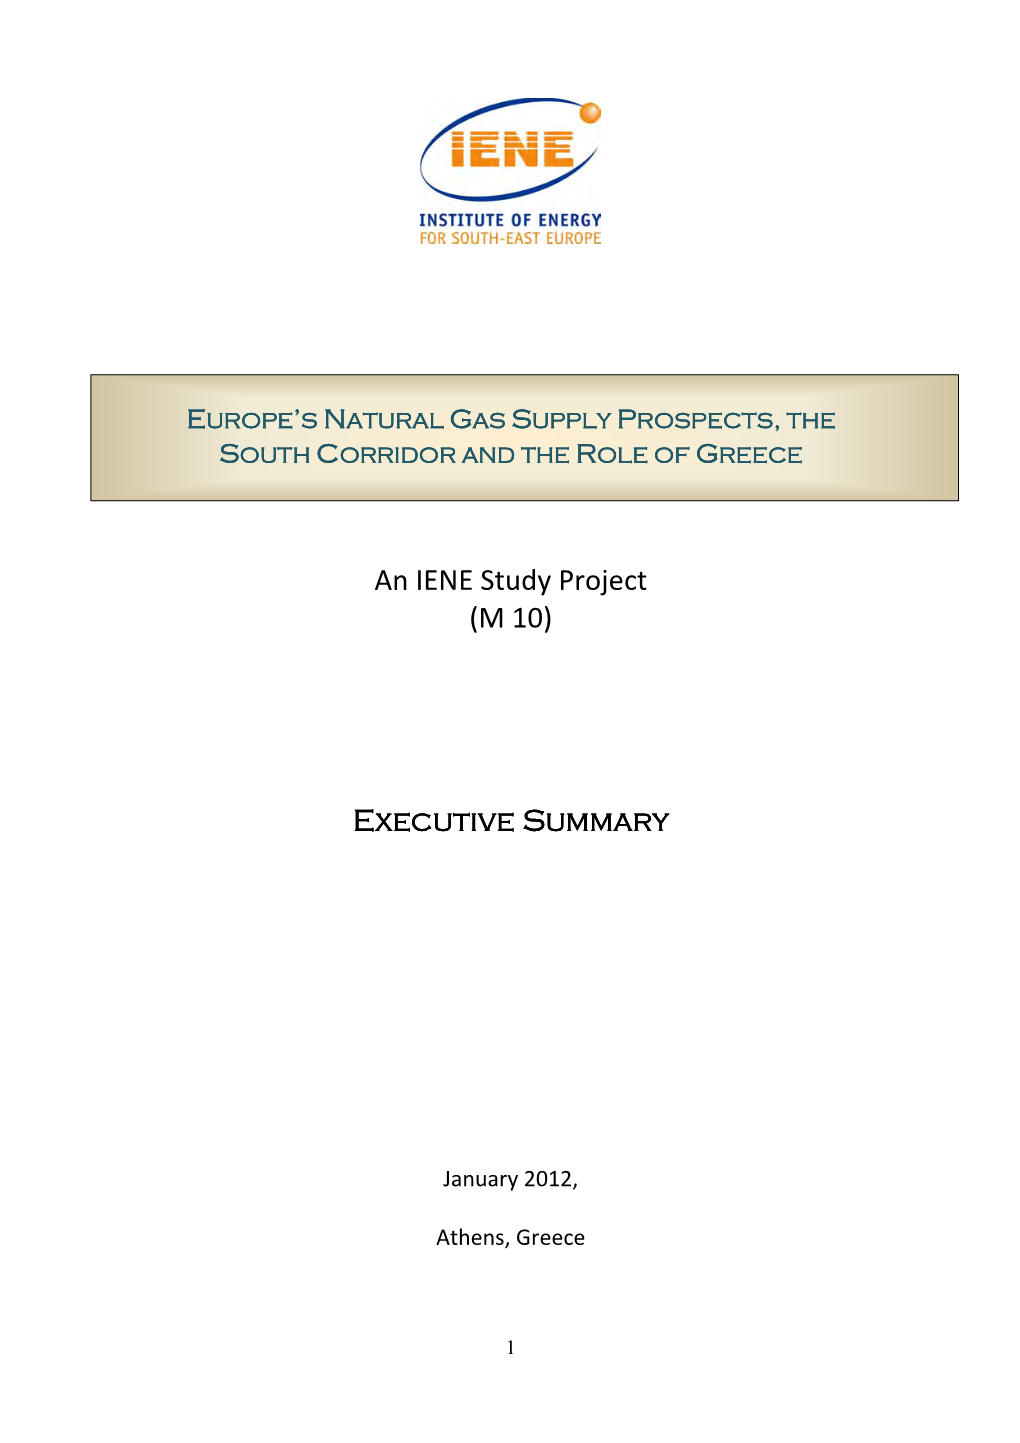 Download the Executive Summary